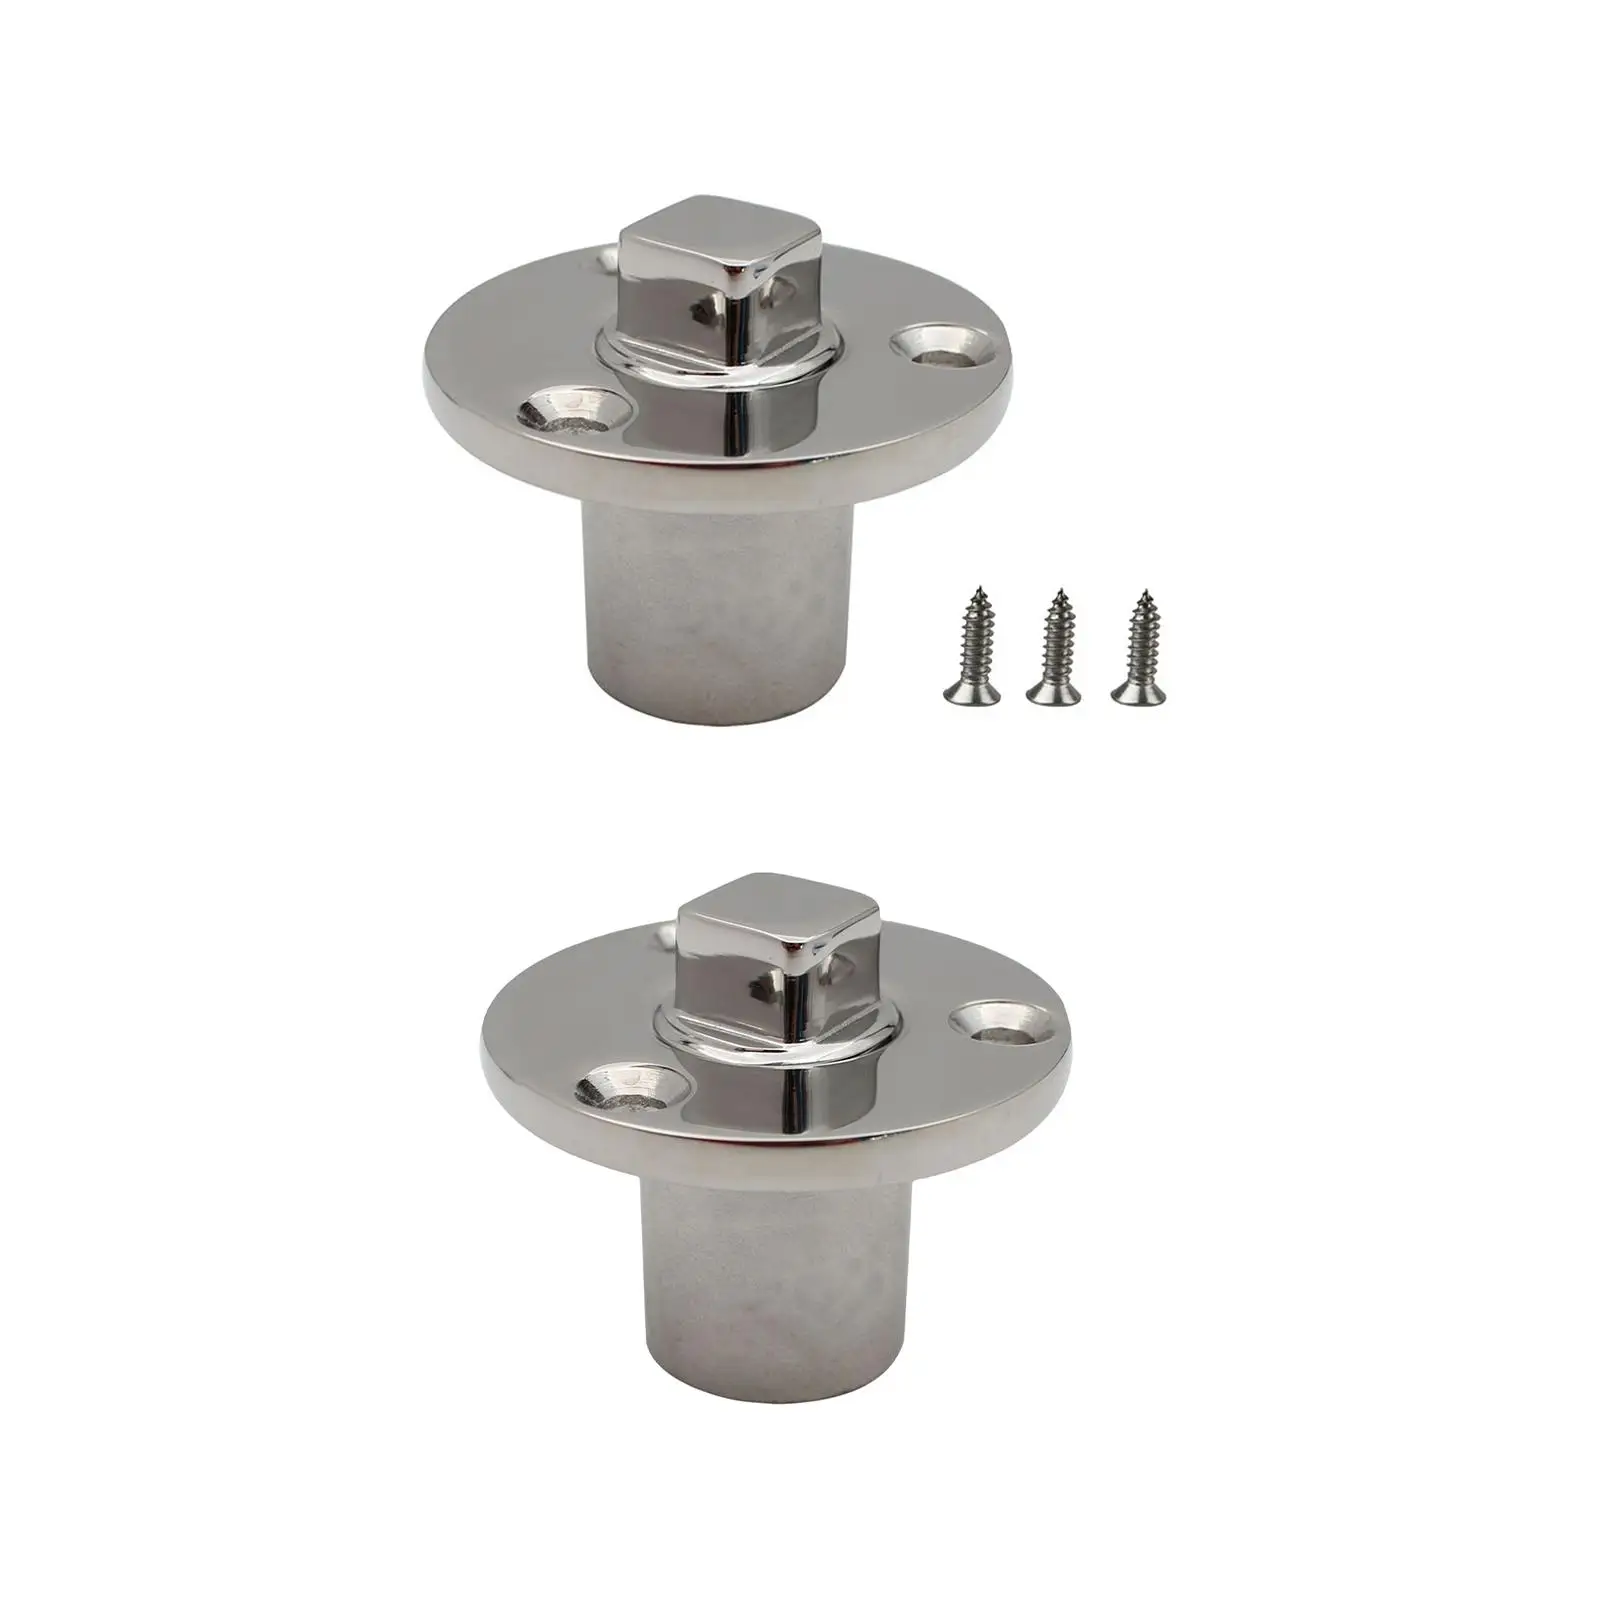 Drain Plug, Heavy Duty, 316 Stainless Steel, Drain Bung, for Ship Transom Dinghy Marine Boat